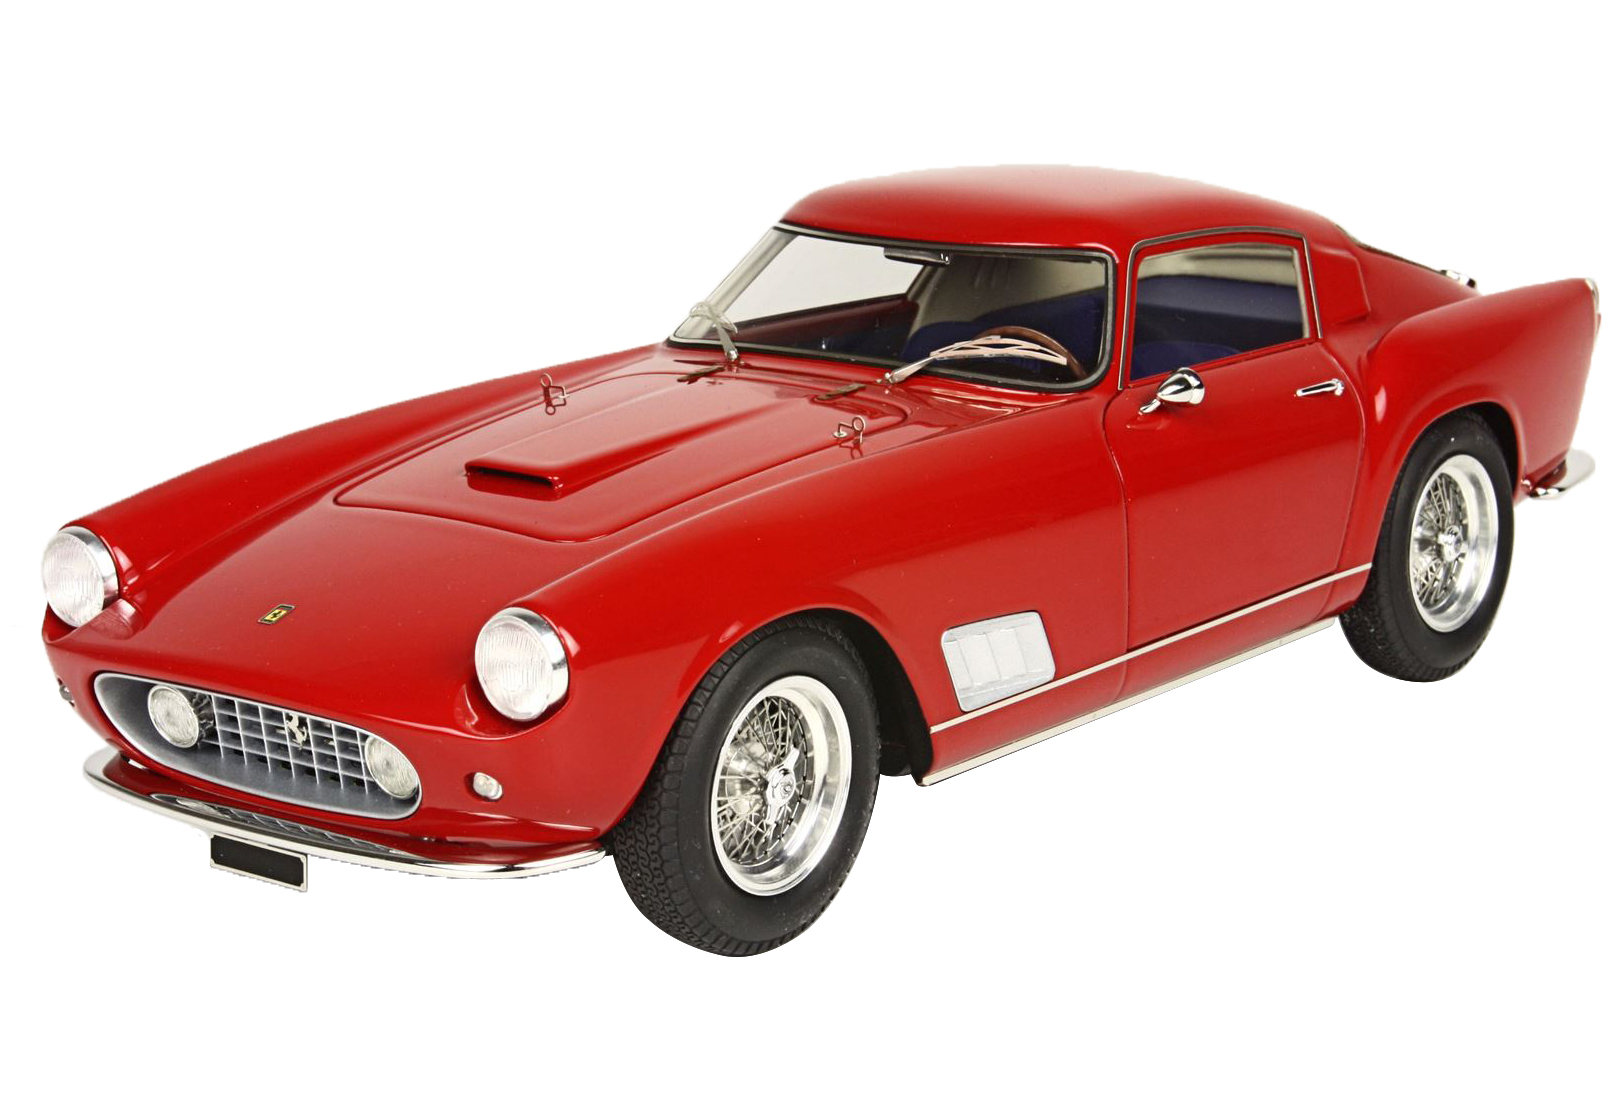 1958 Ferrari 250 TDF Faro Diritto Red with DISPLAY CASE Limited Edition to 300 pieces Worldwide 1/18 Model Car by BBR